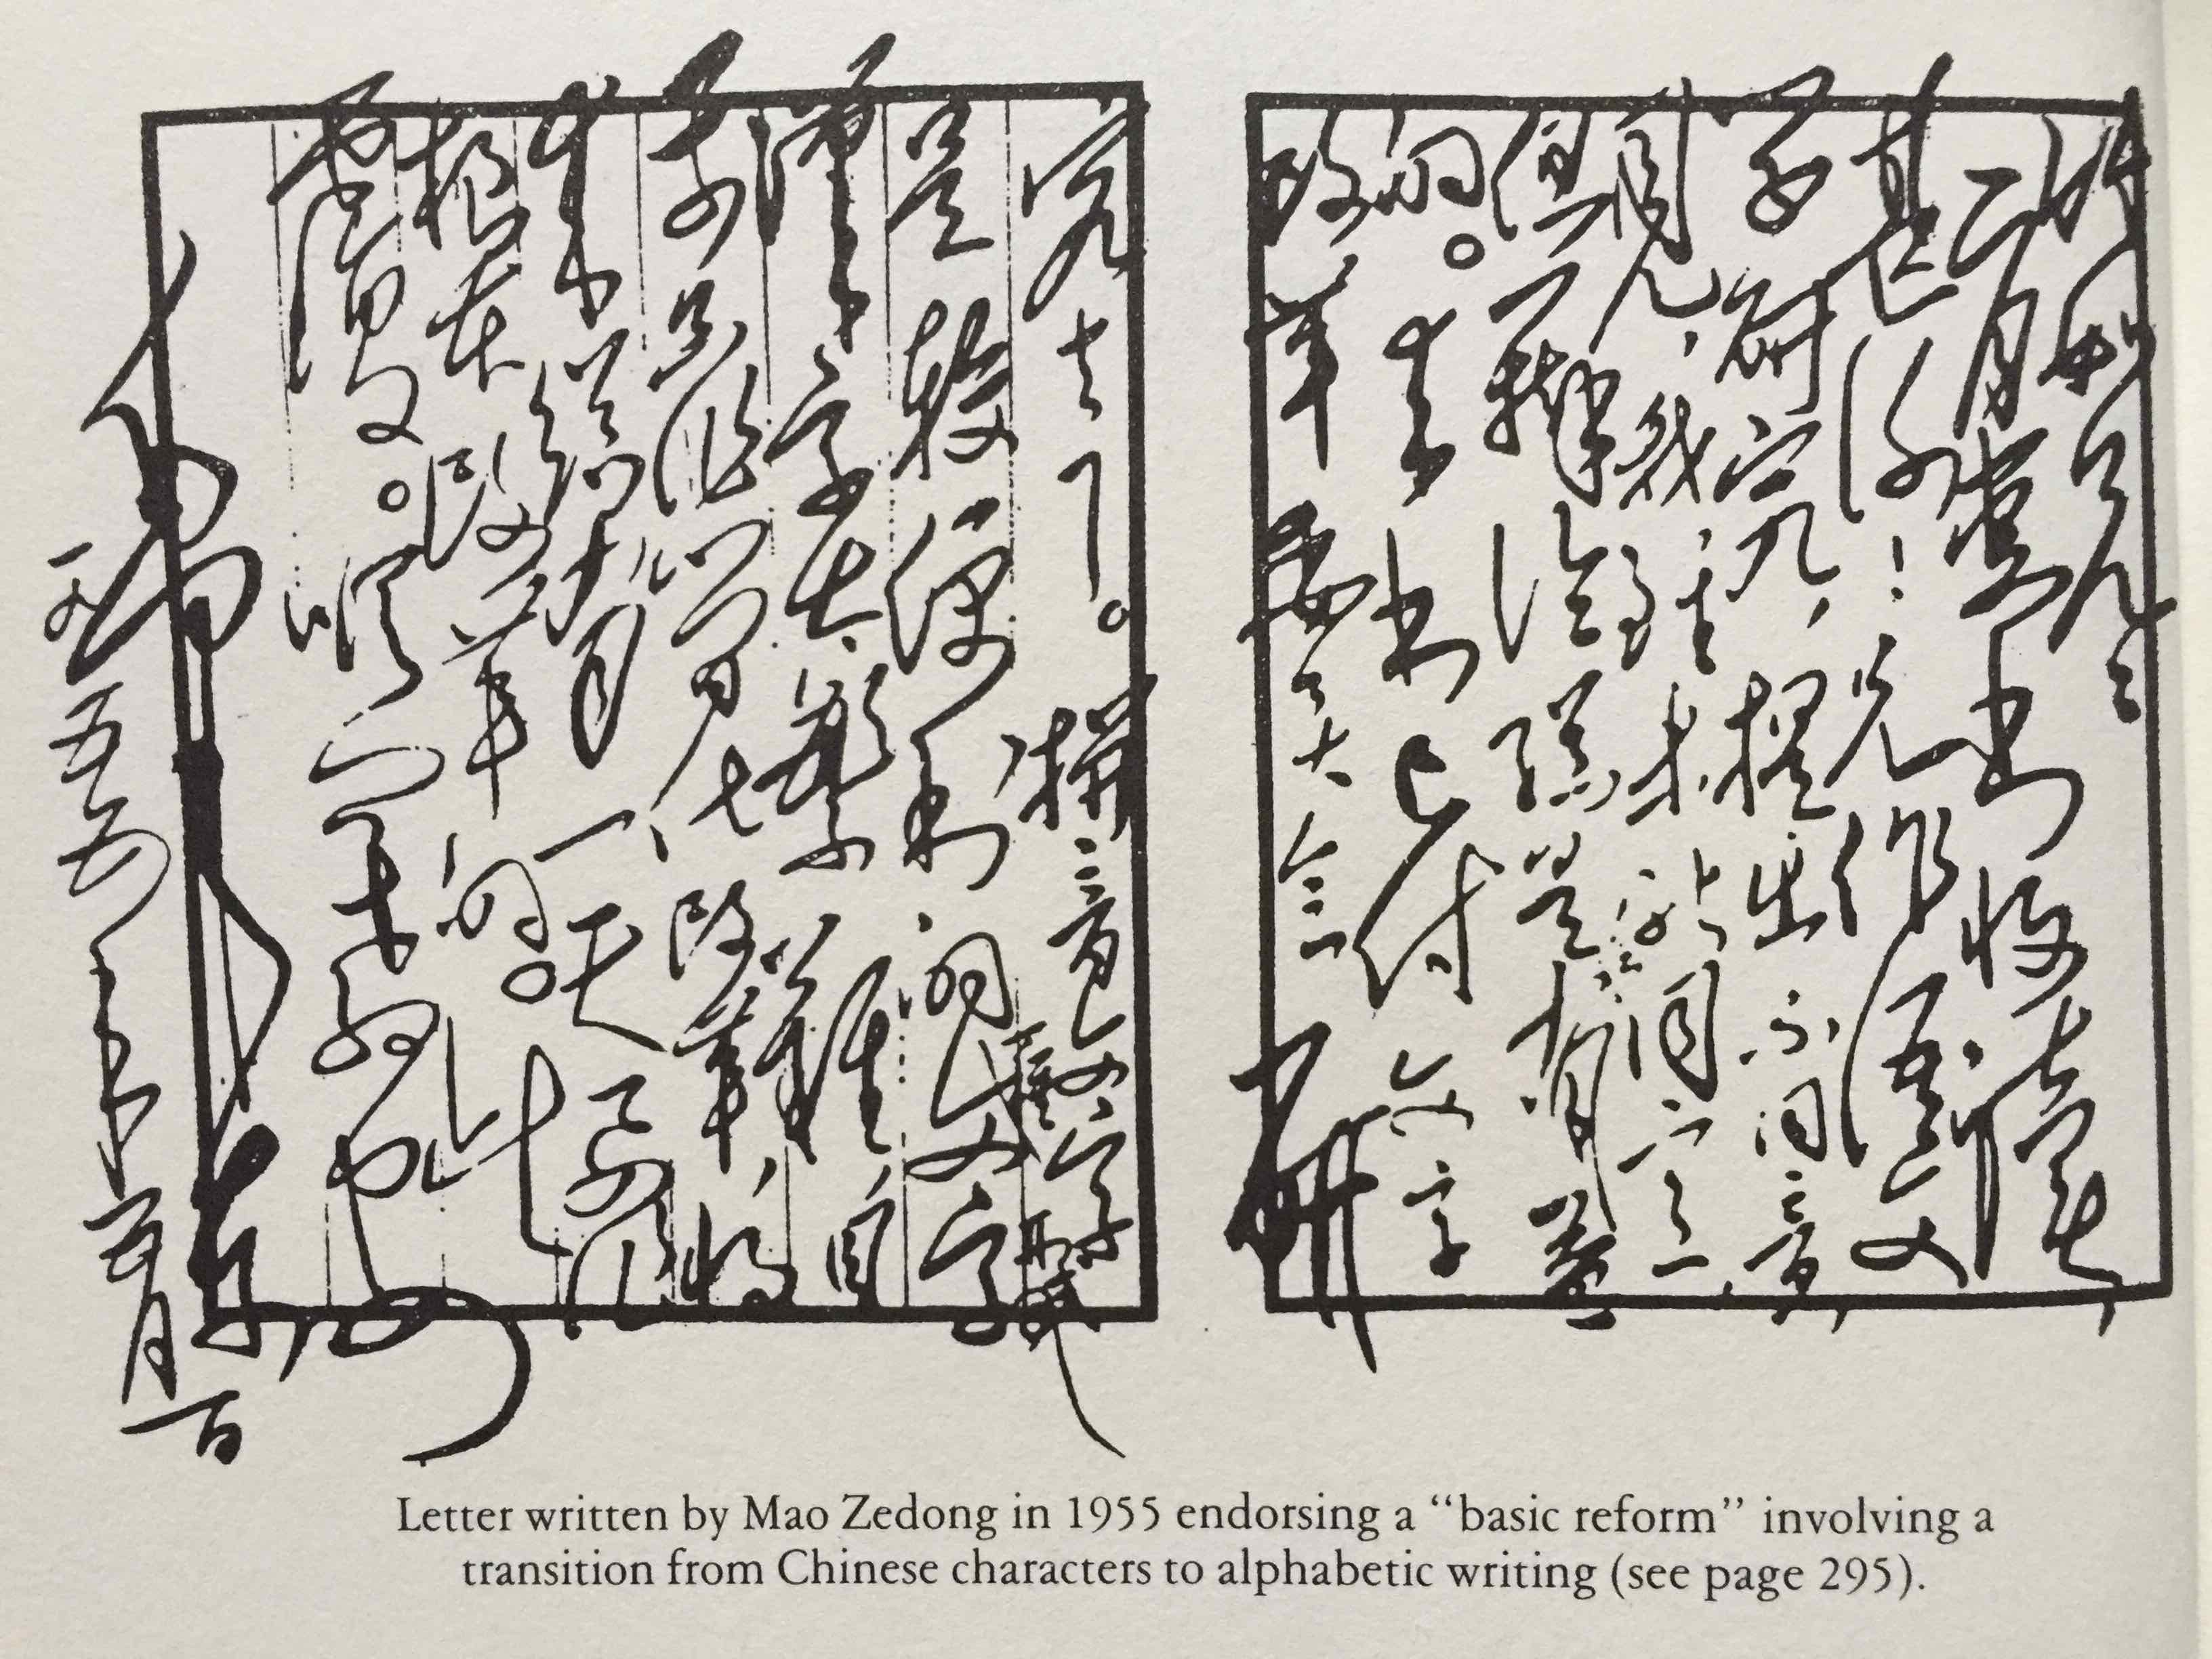 Letter from Mao Zedong re basic reform of Chinese writing